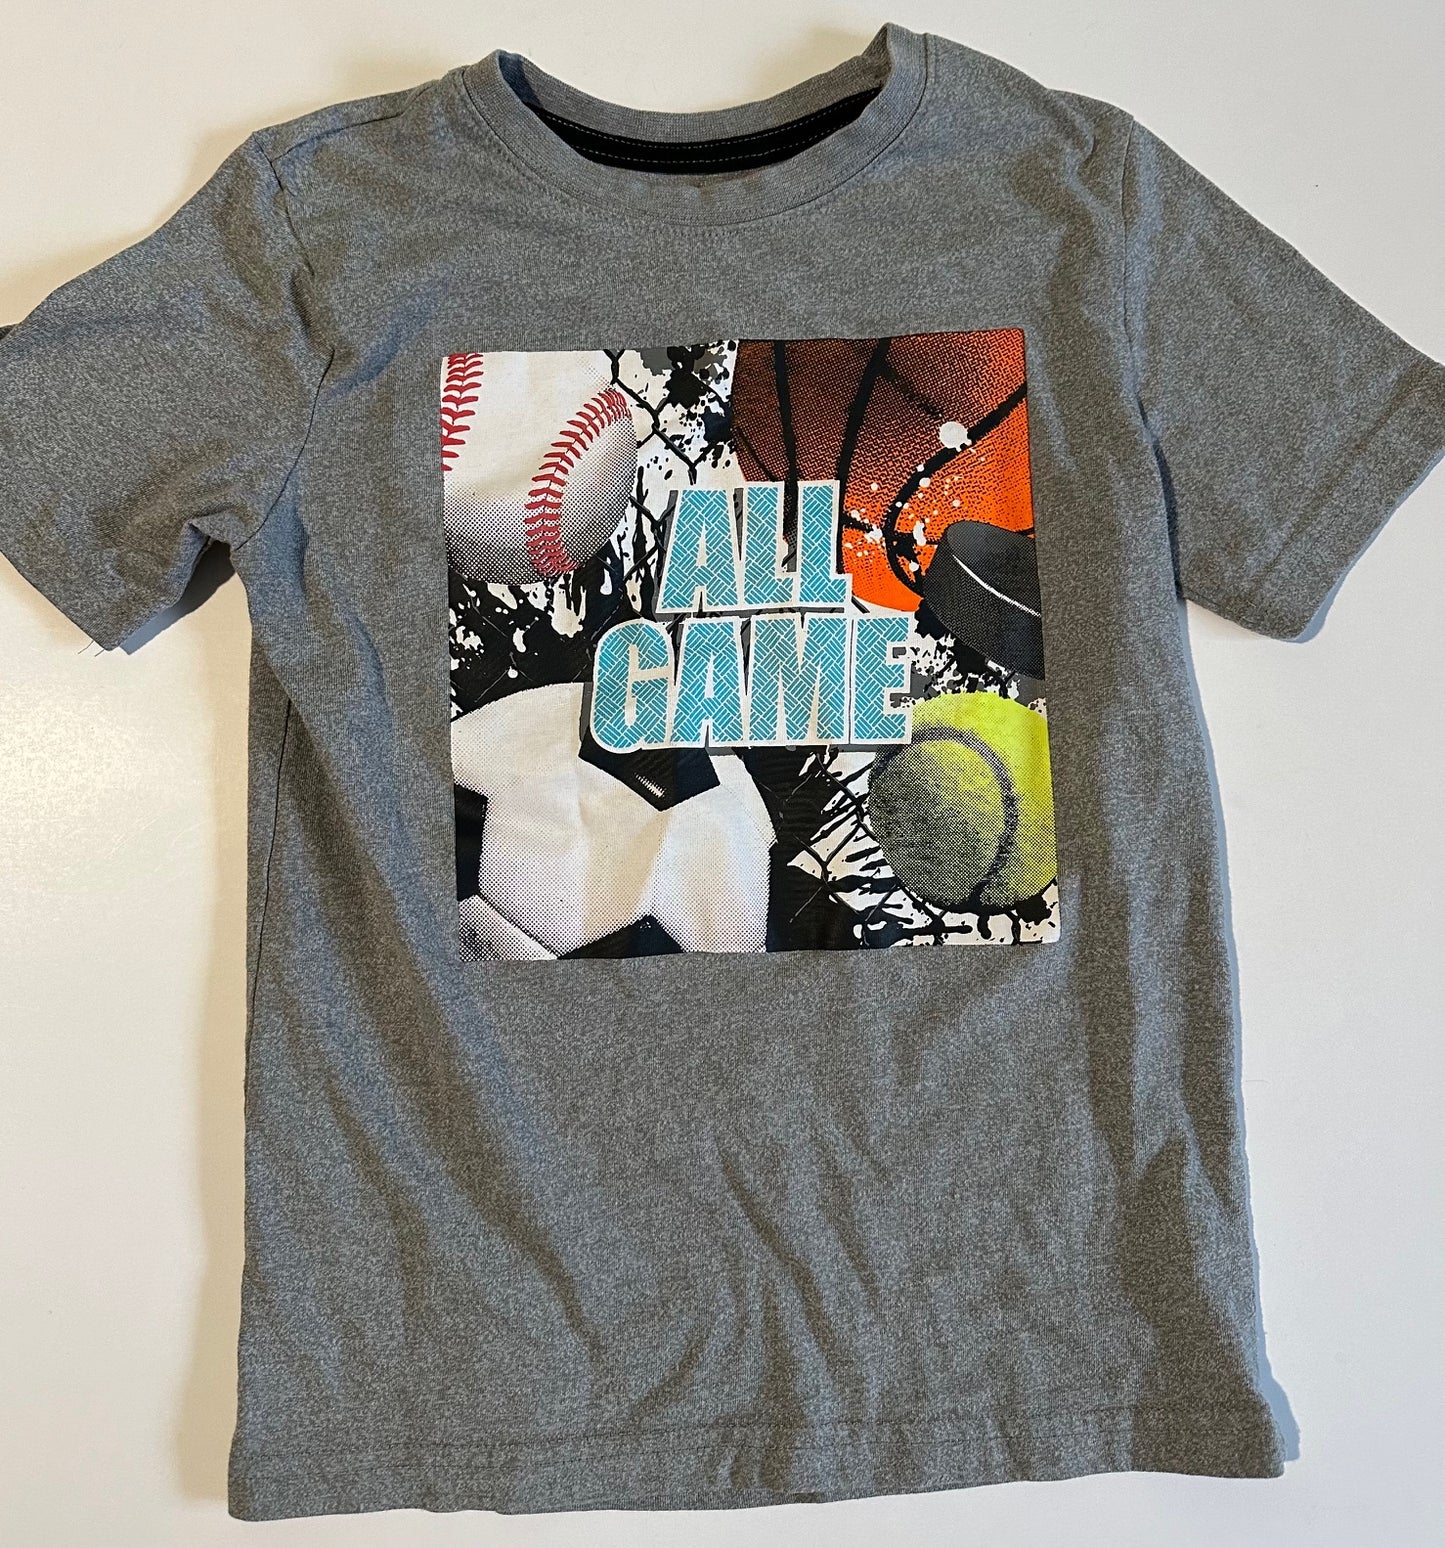 George, Grey "All Game" Sports T-Shirt - Size Small (6)